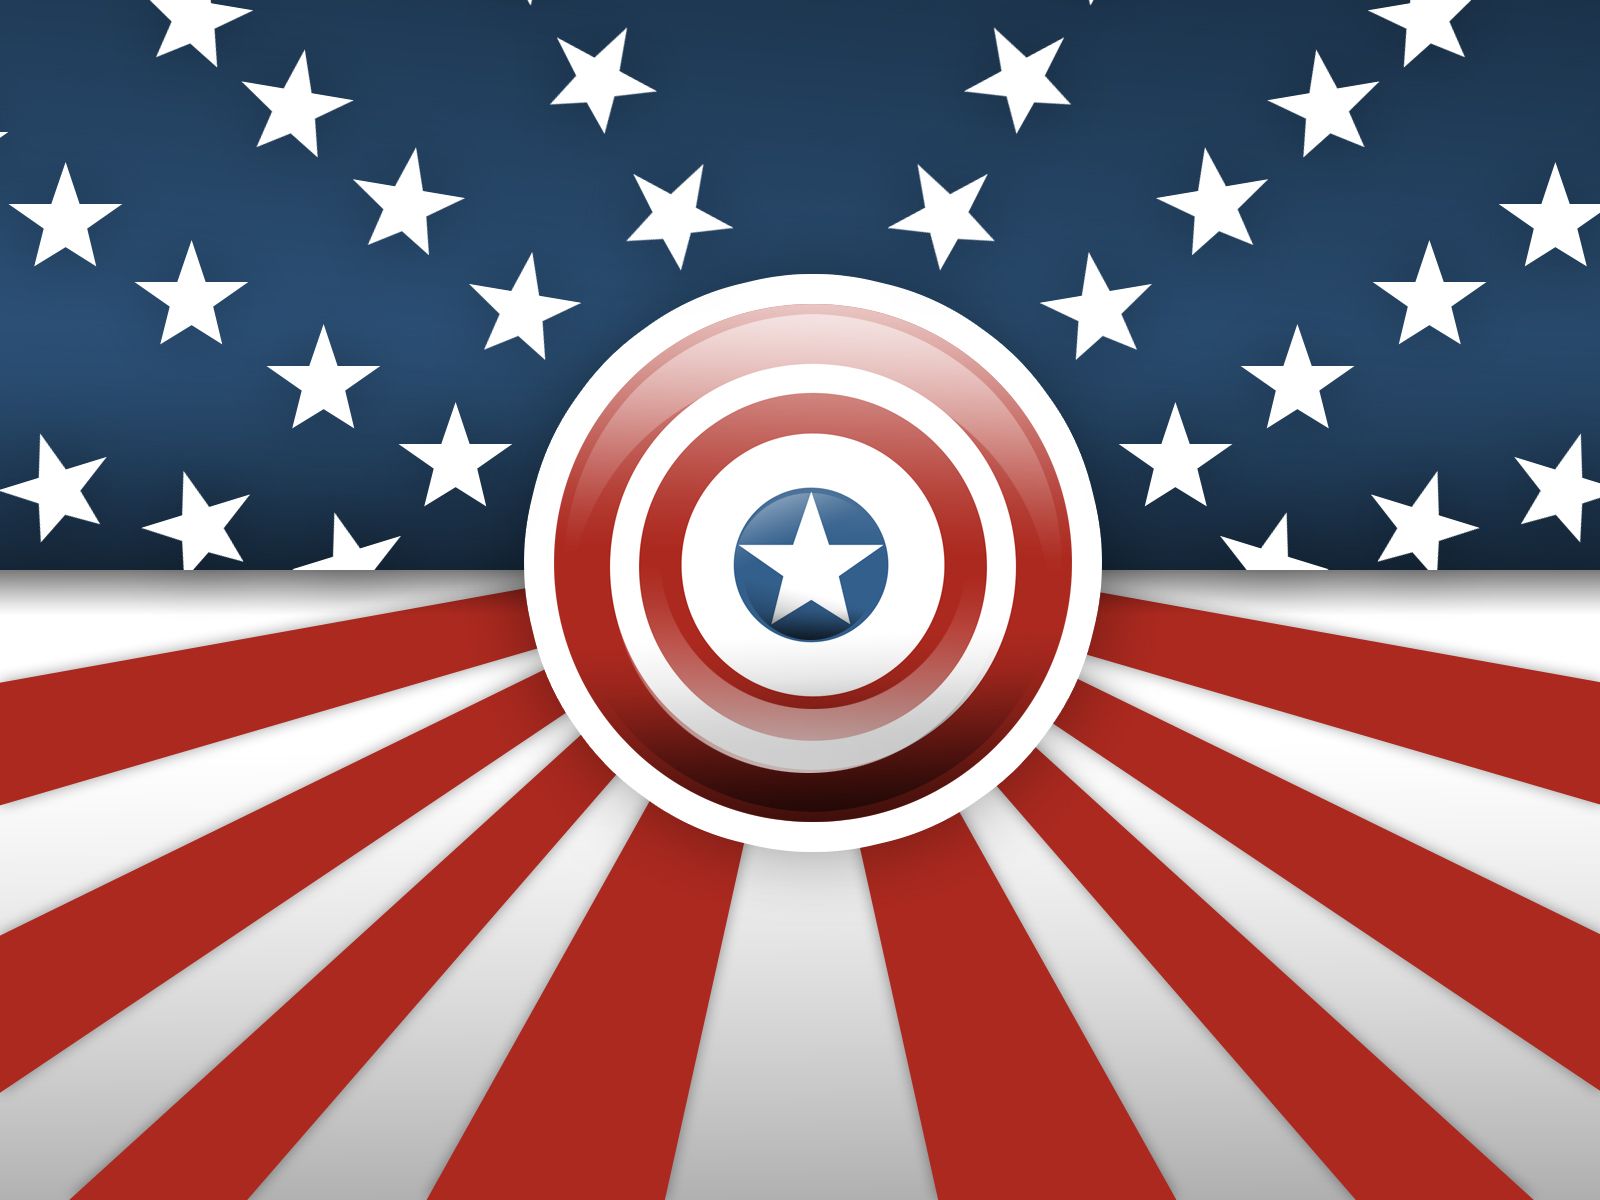 American Flag With Captin America Captain By D4nart